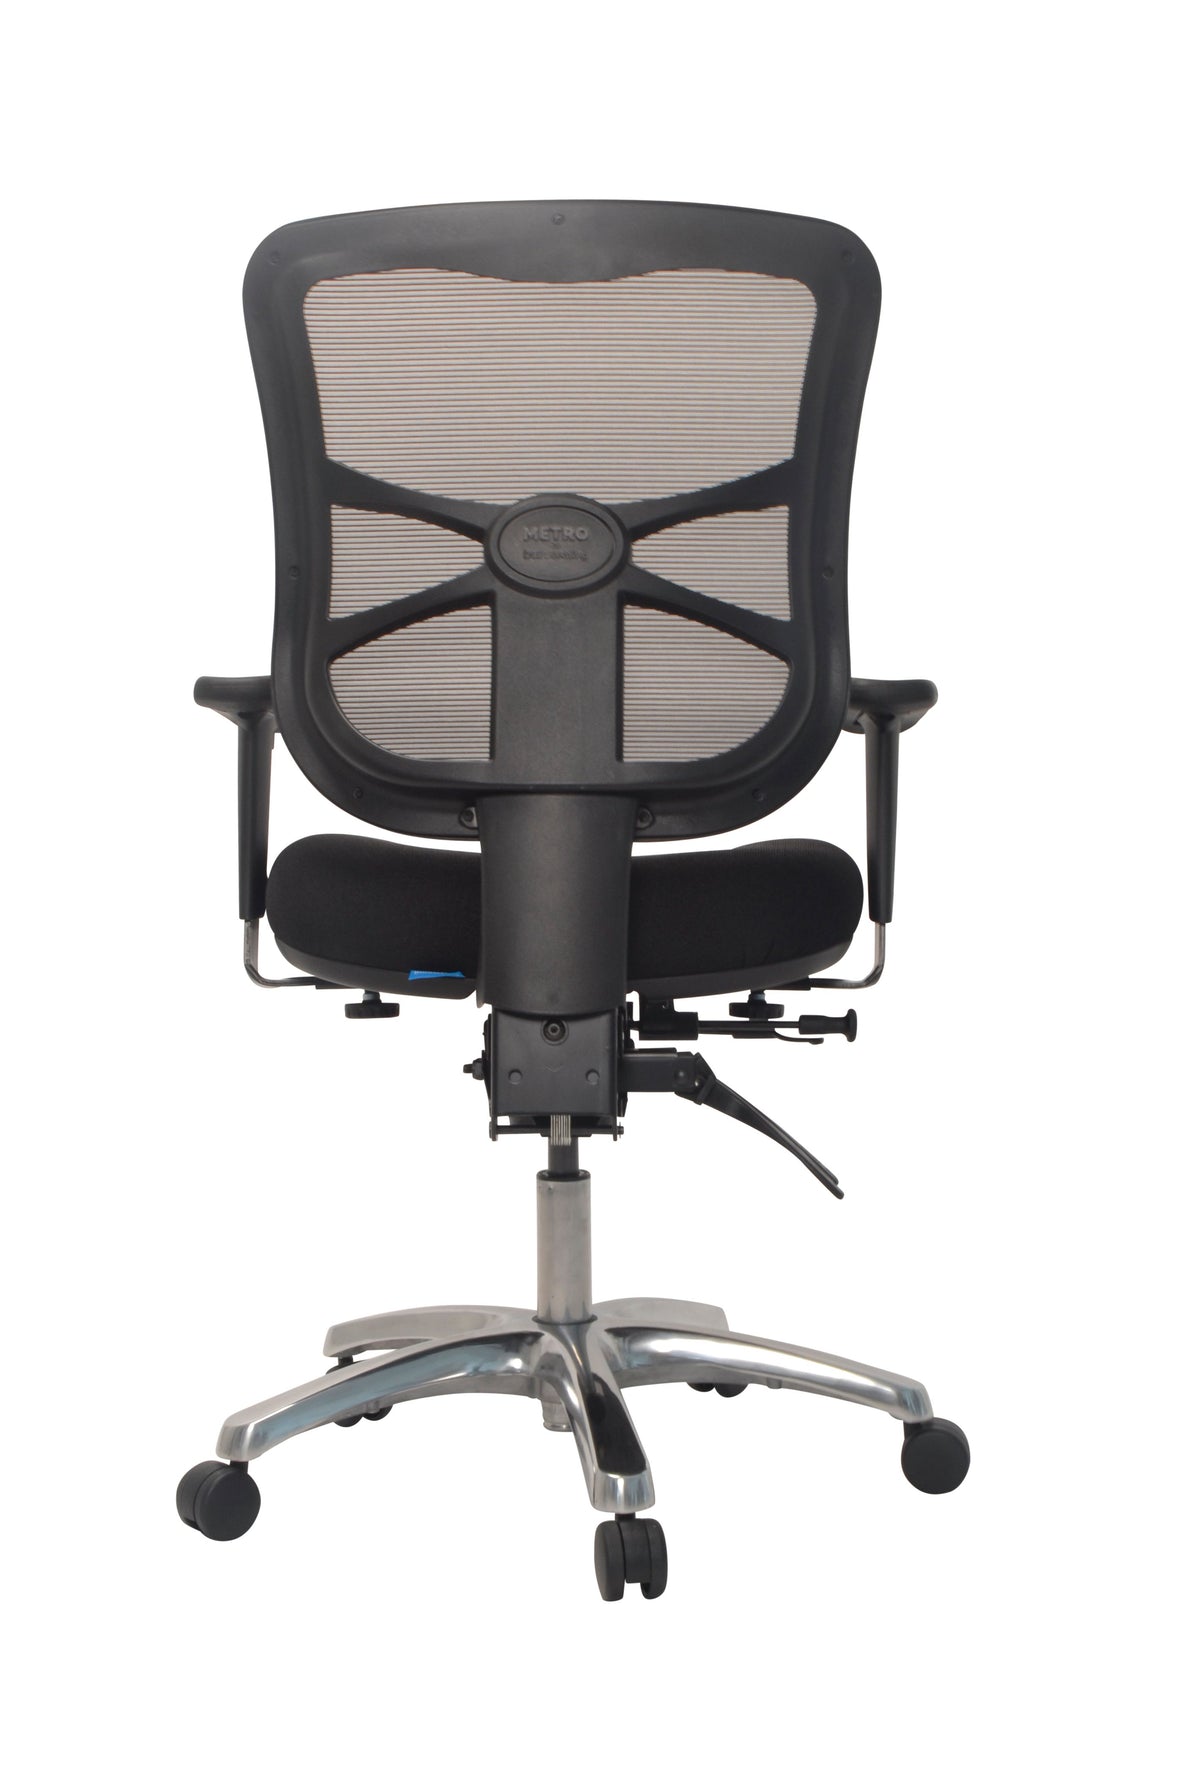 METRO EXECUTIVE MESH BACK CHAIR 180KG RATED